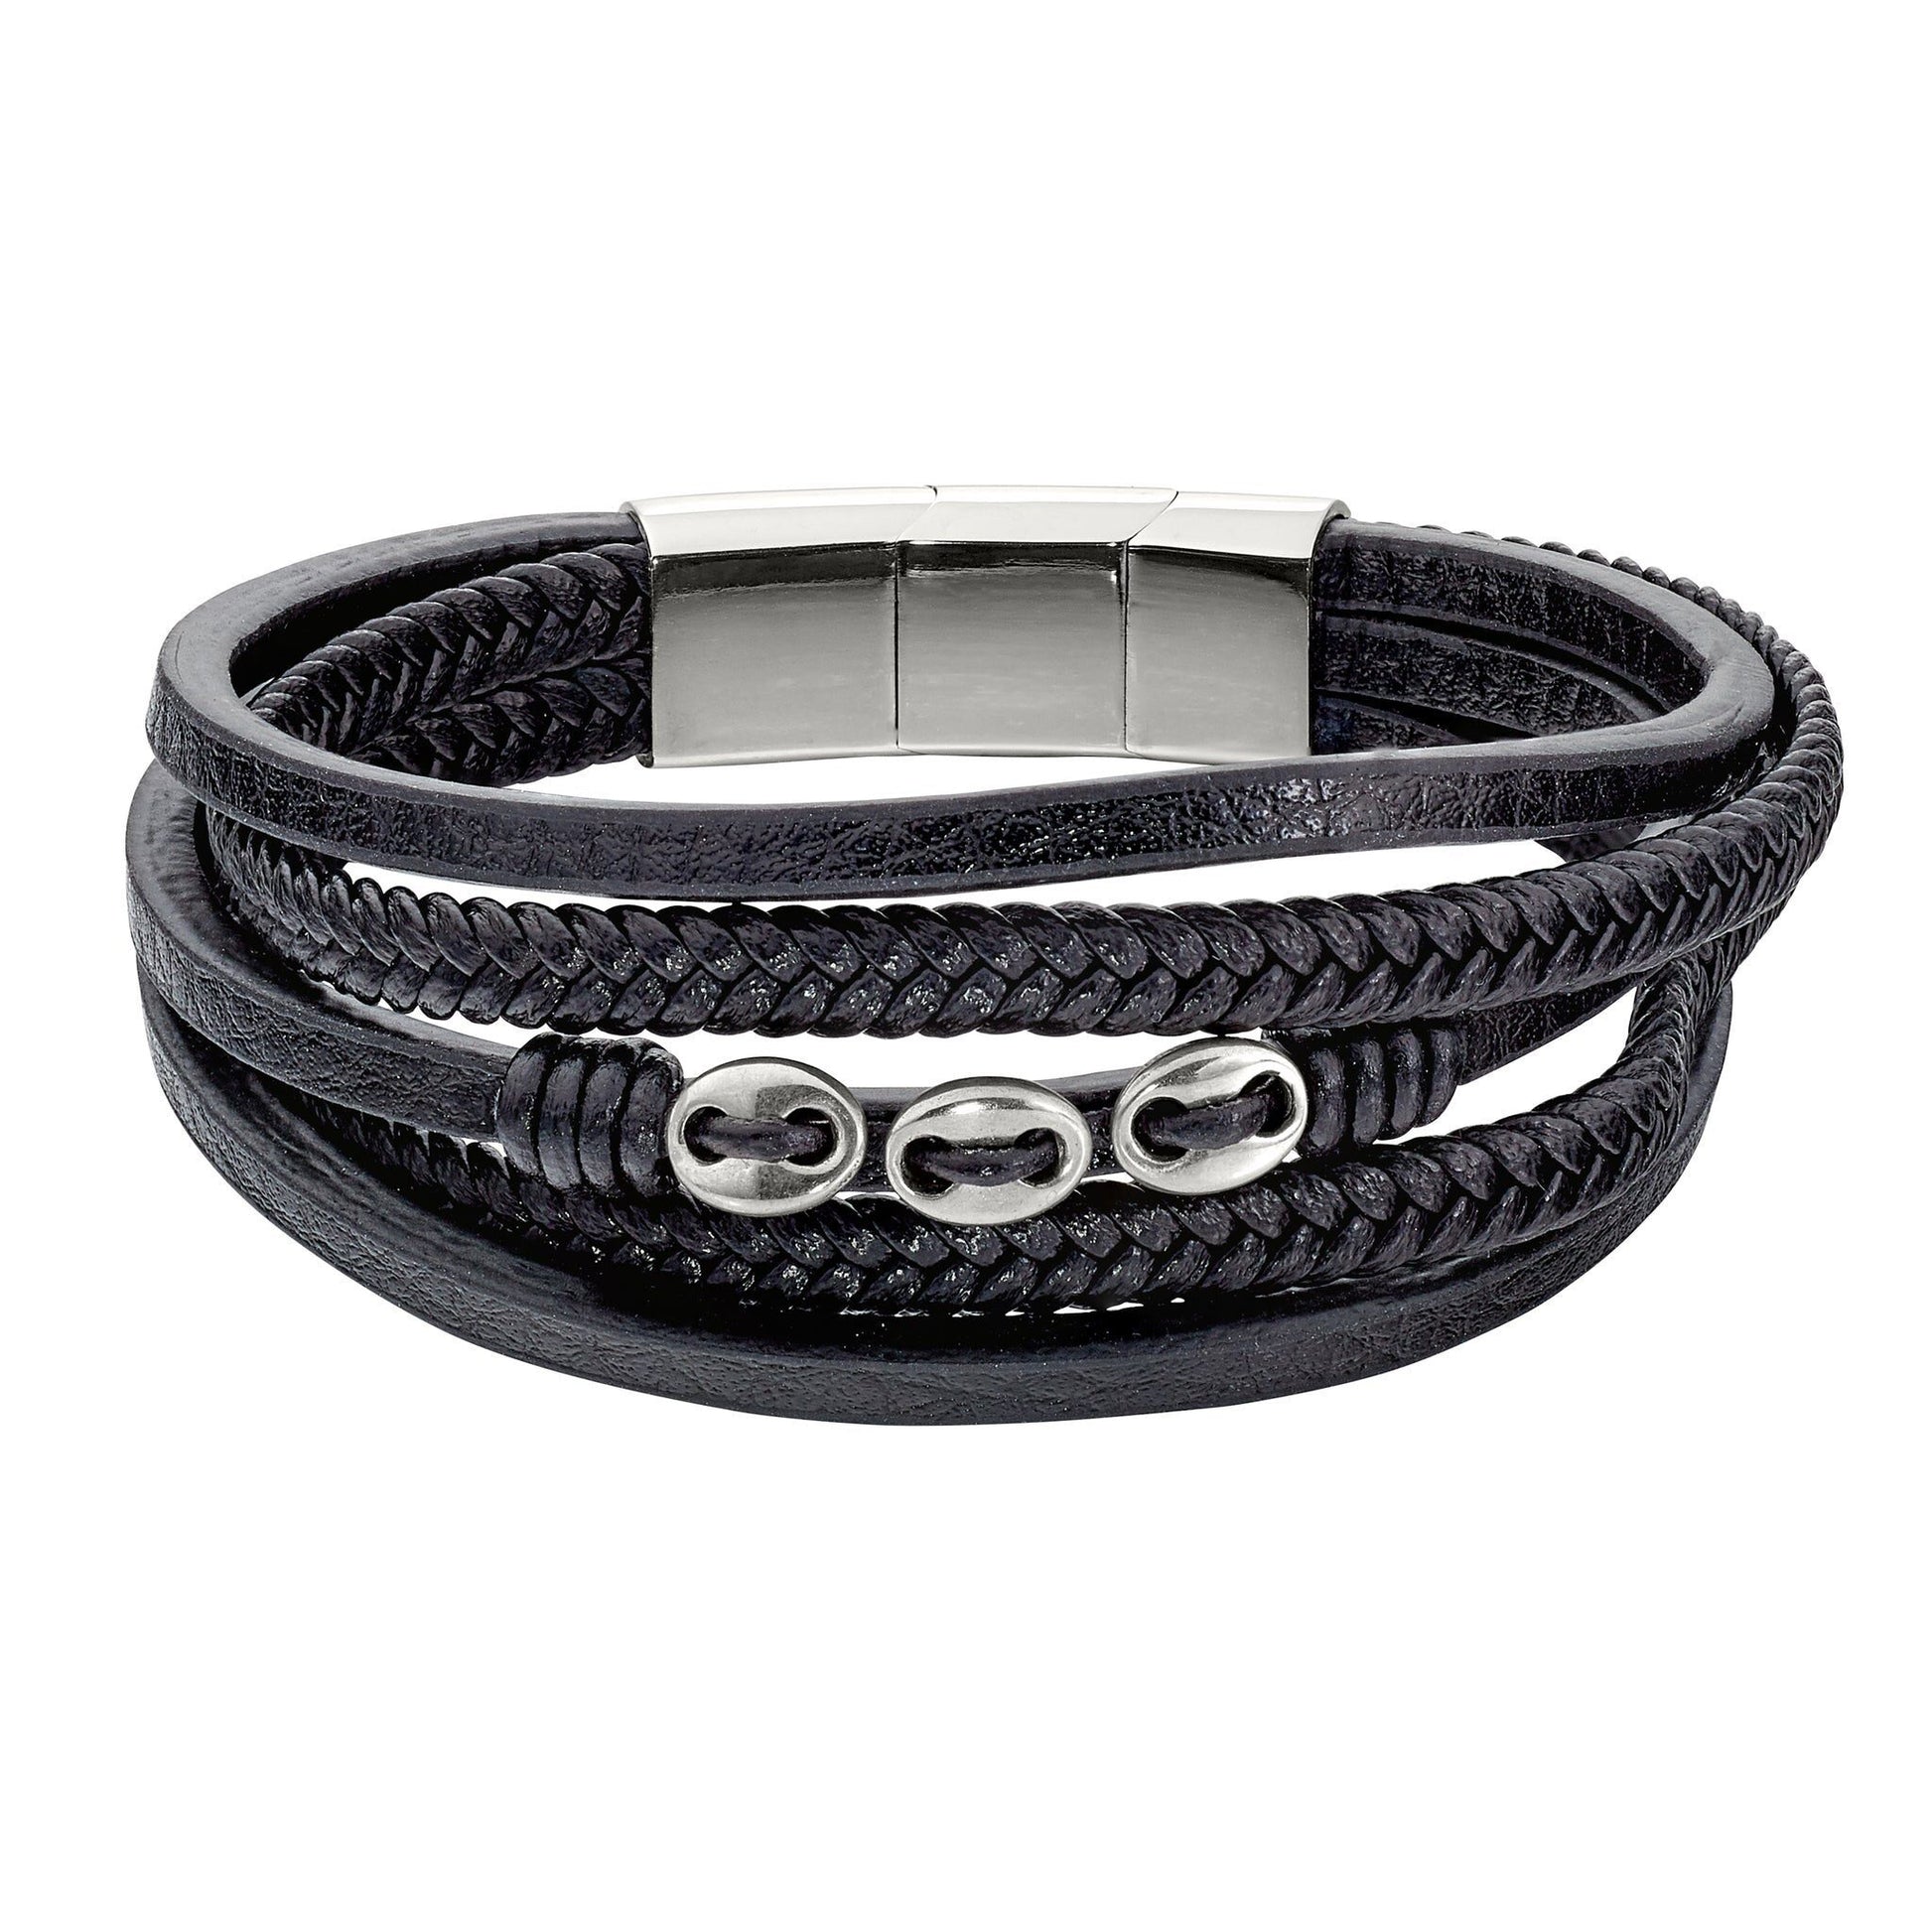 A black leather 5 cord bracelet with 3 stainless steel buttons displayed on a neutral white background.